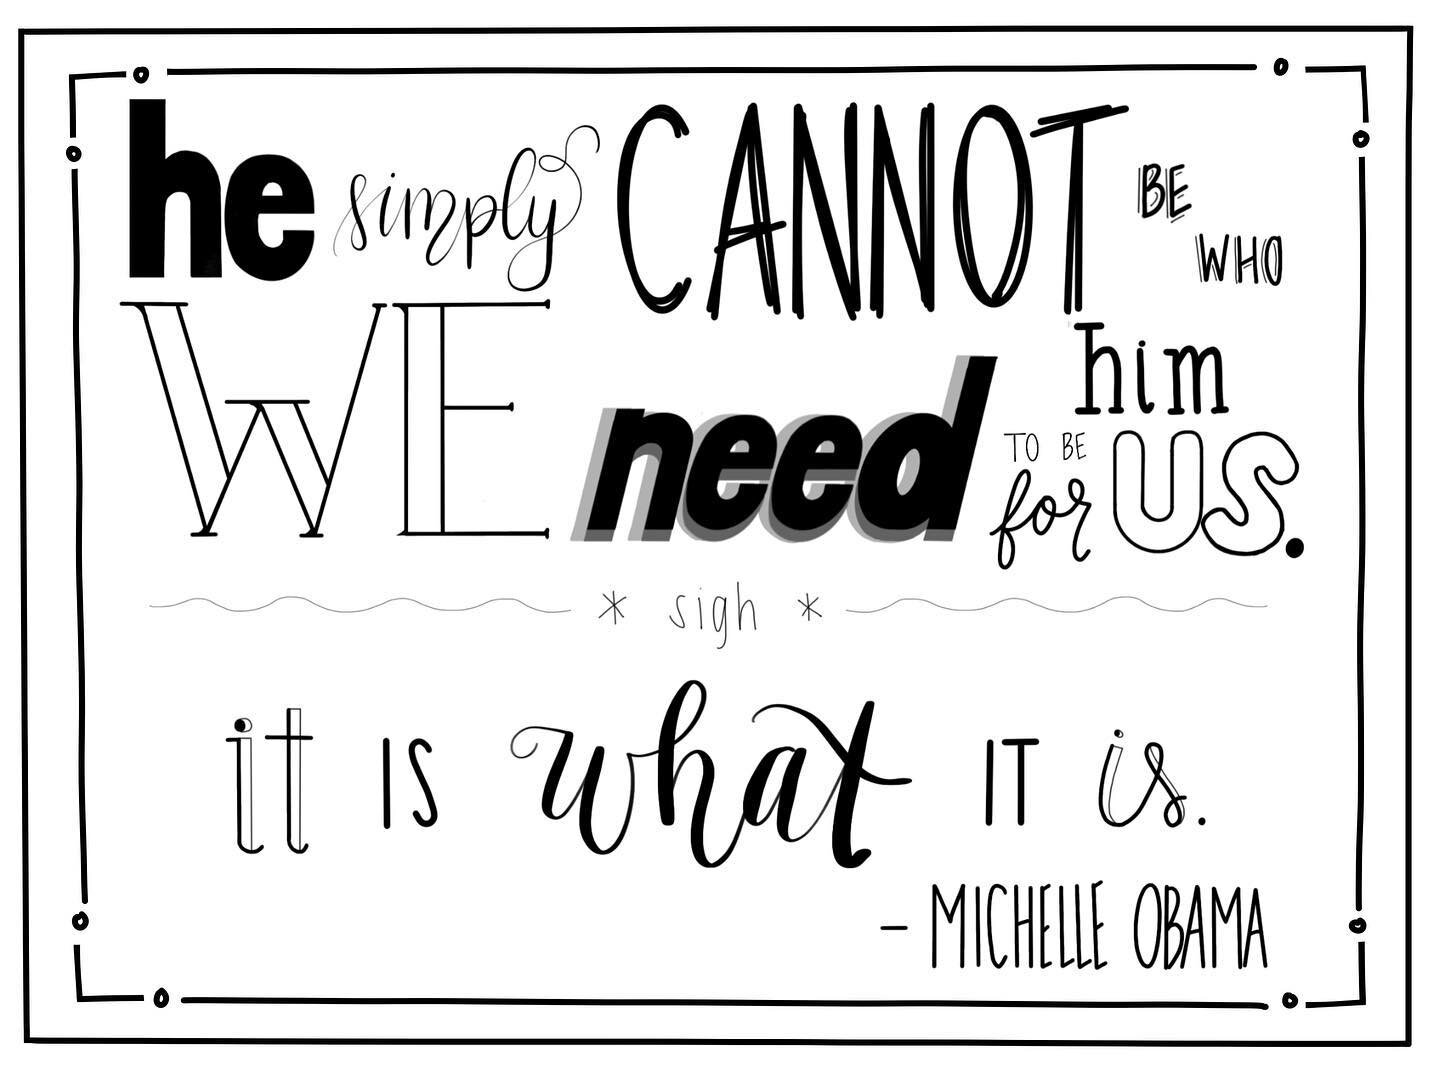 &ldquo;He simply cannot be who we need him to be.&rdquo; - Michelle Obama 

artwork by @lizziemickiewicz 
💥Buy💥 the postcard at marvinandtaco.com

#michelleobama #barackobama #obama #presidentobama #sashaobama #maliaobama #potus #presidentbarackoba